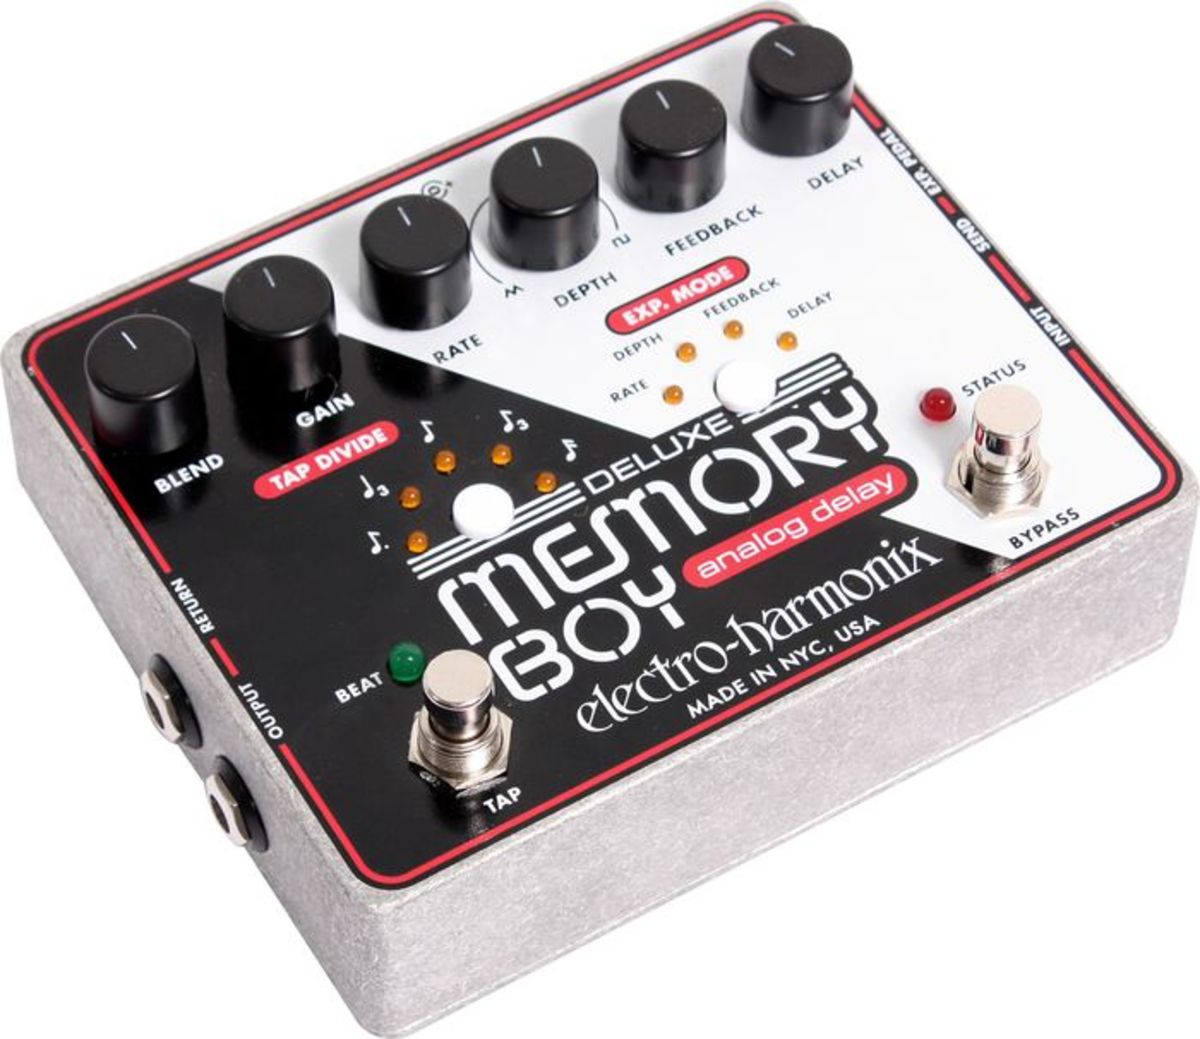 The Deluxe Memory Boy analog delay pedal by Electro-Harmonix is packed with cool features and great sounds.